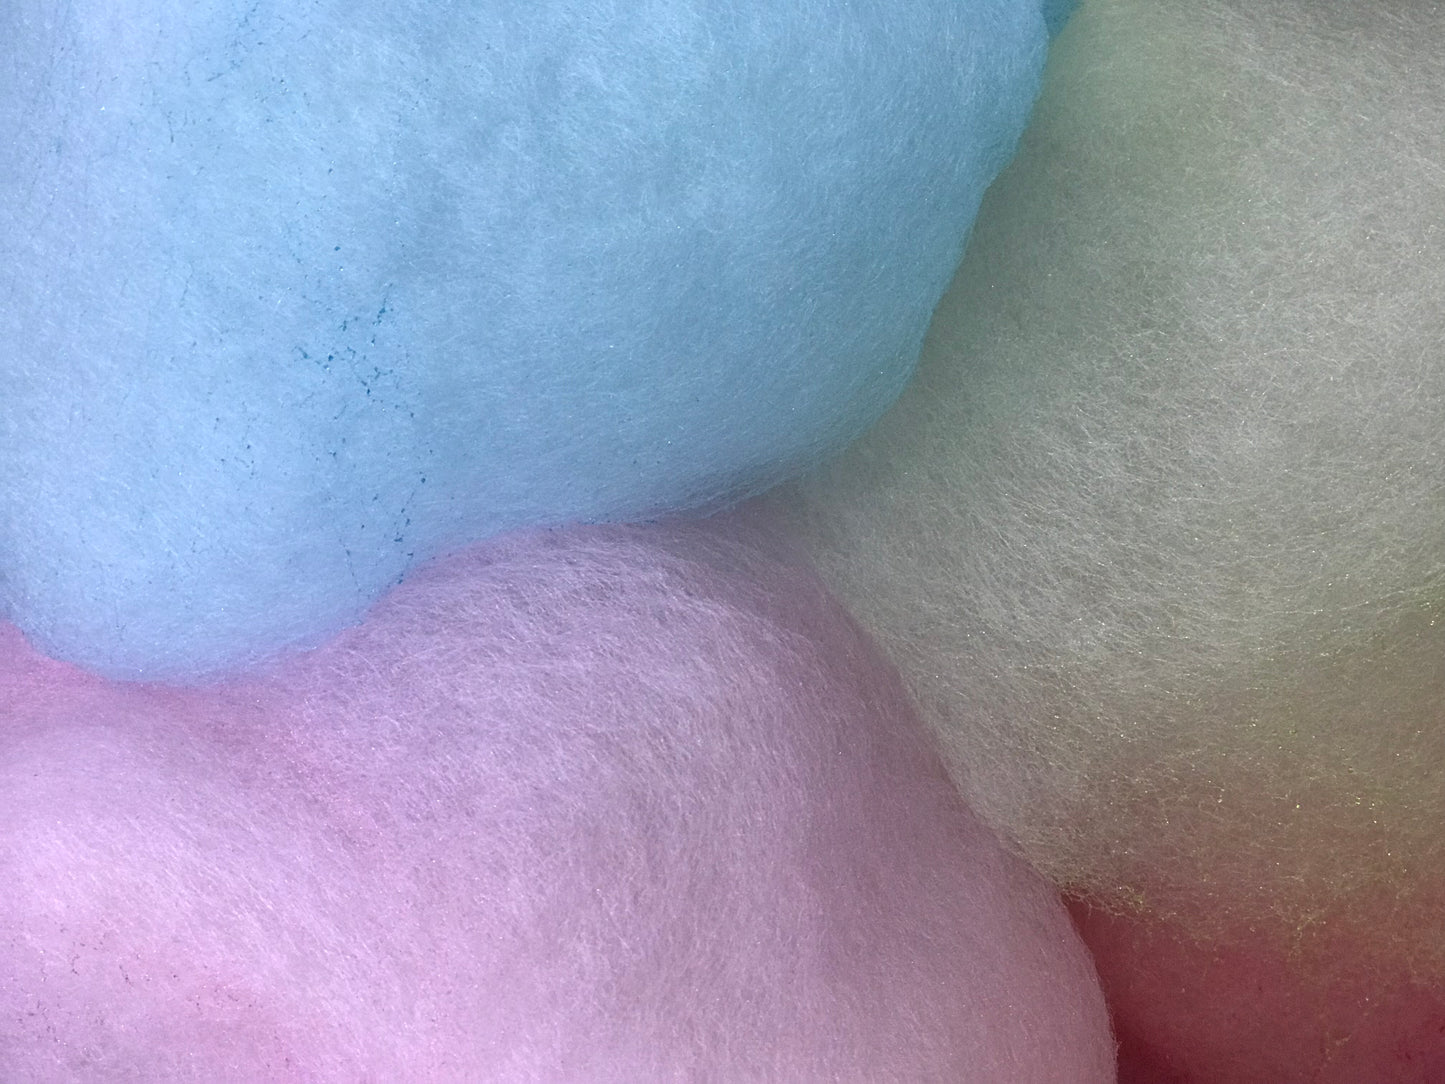 4 Kilos of Fairy Floss sugar and 100 wooden fairy floss sticks free EXPRESS postage oz wide